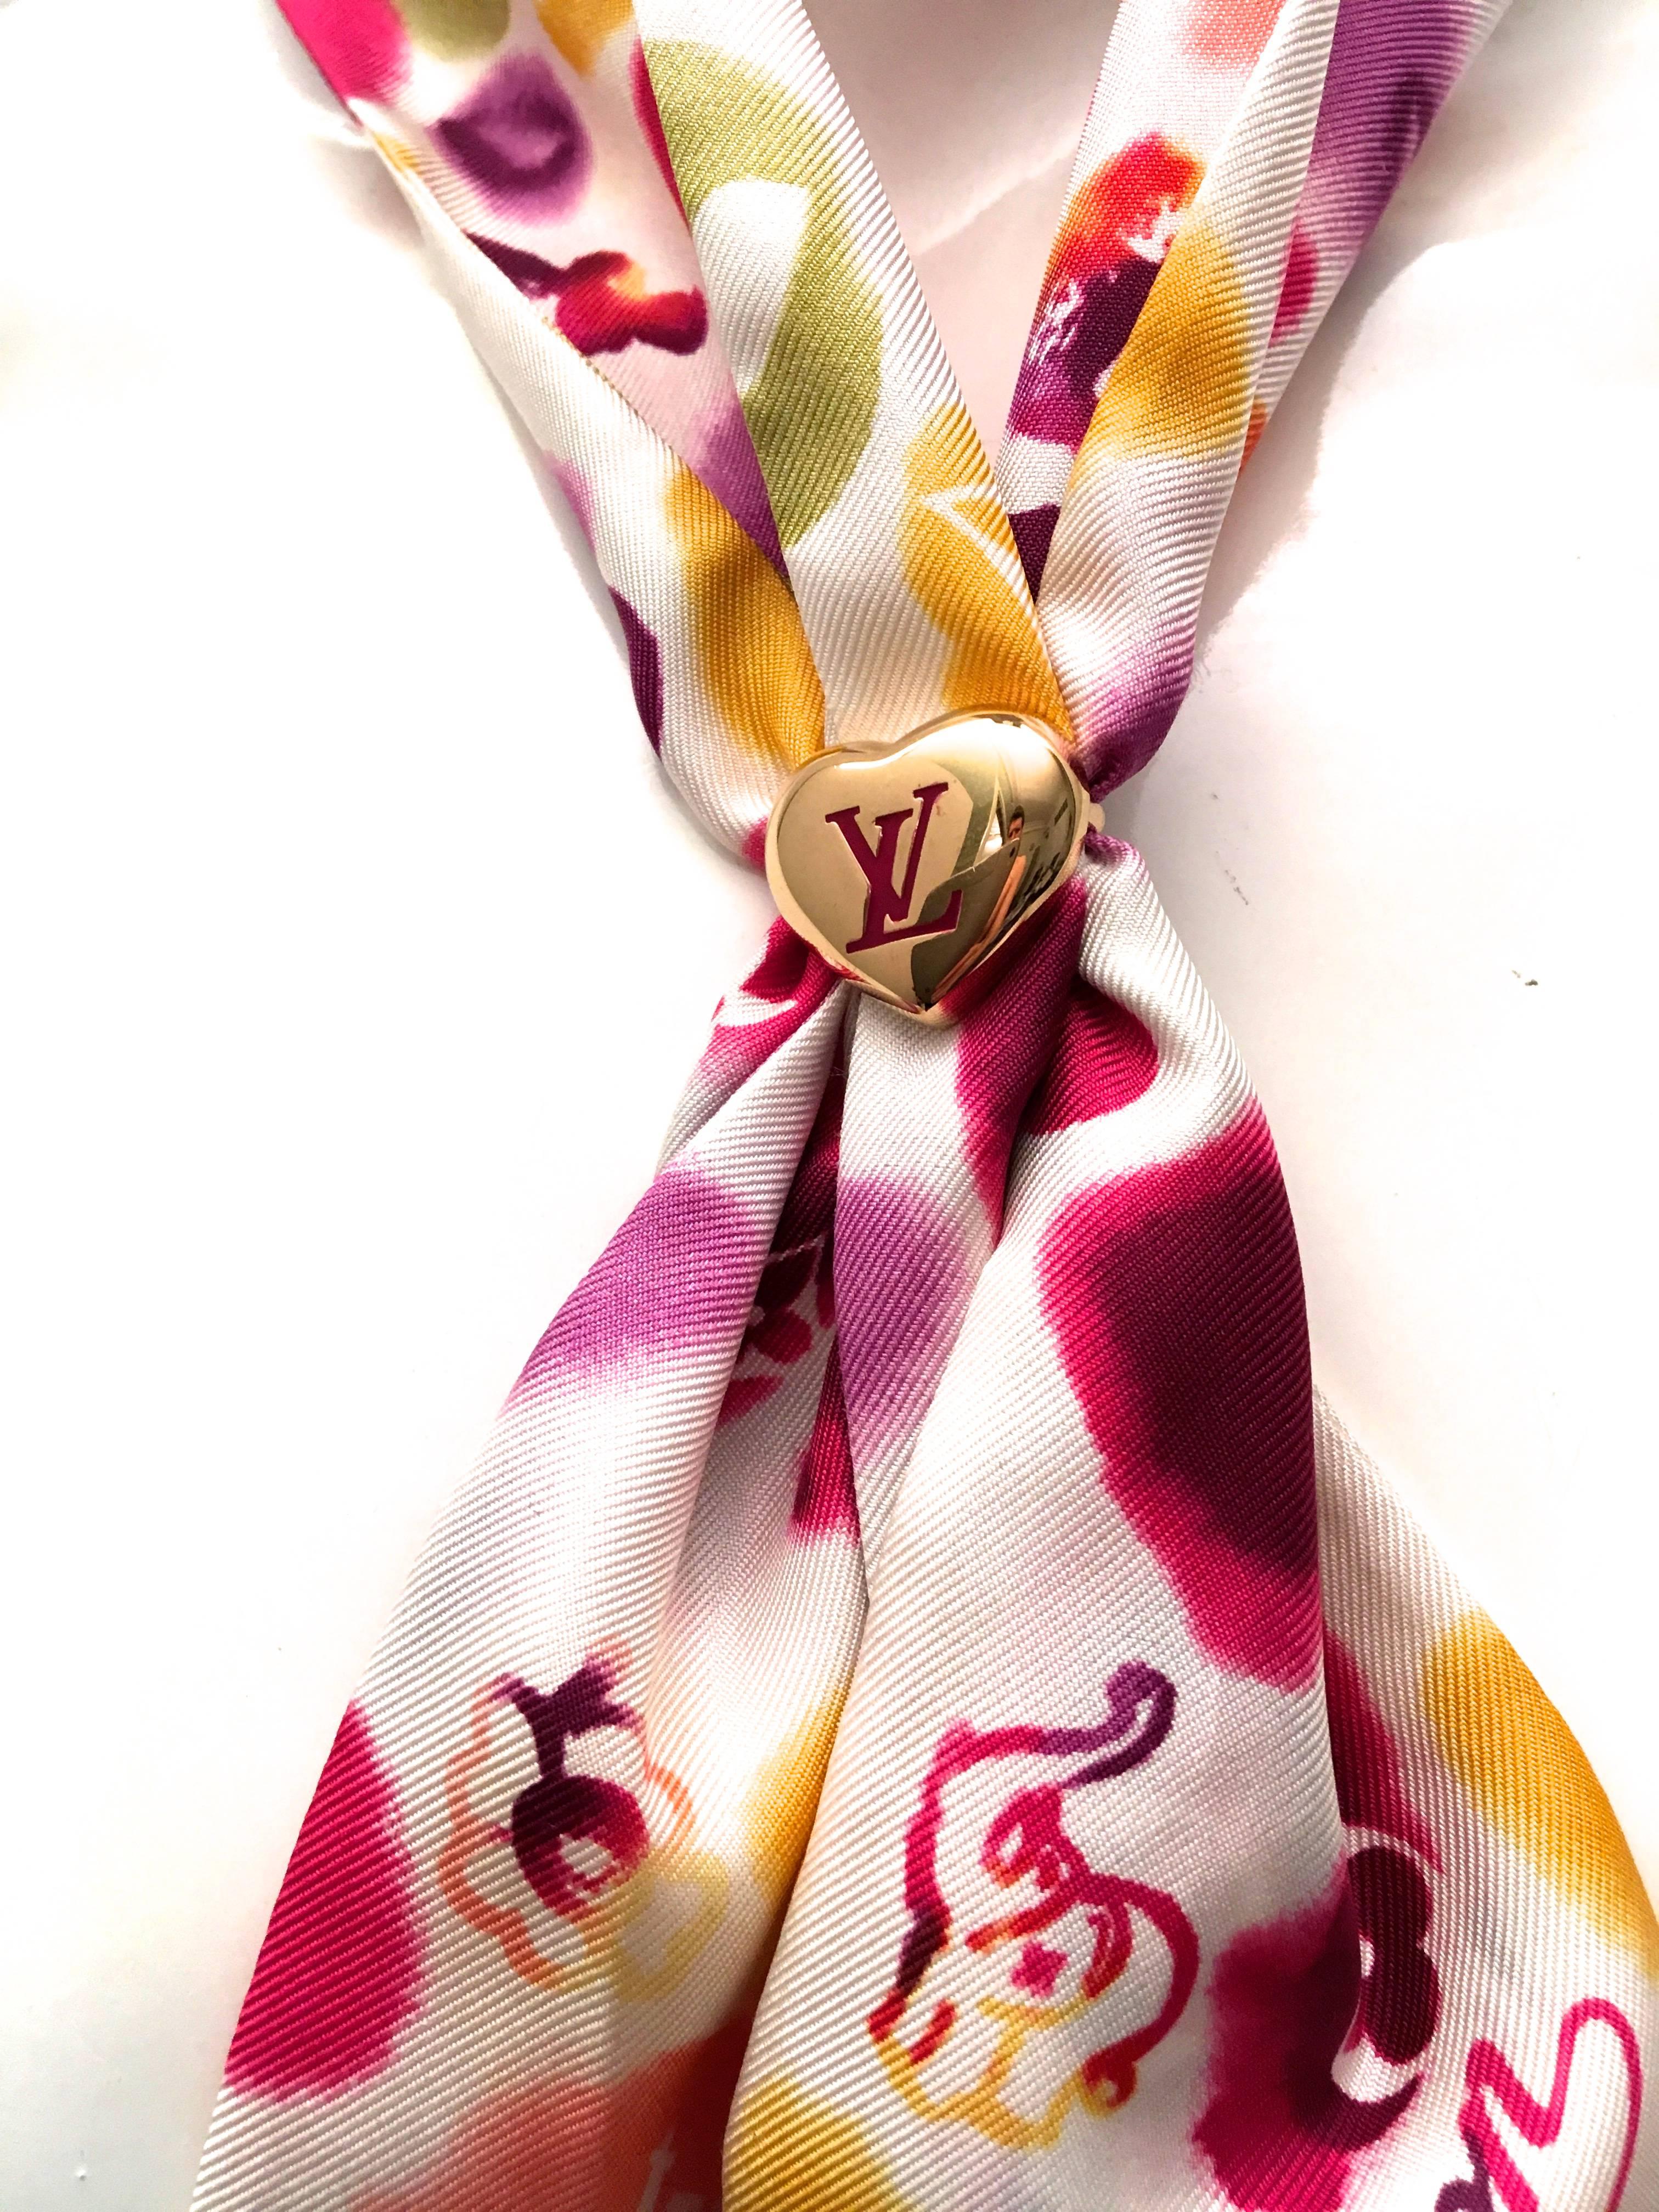 Presented here is a silk scarf from Louis Vuitton Paris. This beautiful scarf is comprised of a series of colorful watercolor style graphics against a creamy white background. The colors of the images are varying shades yellow, green, purple, pink